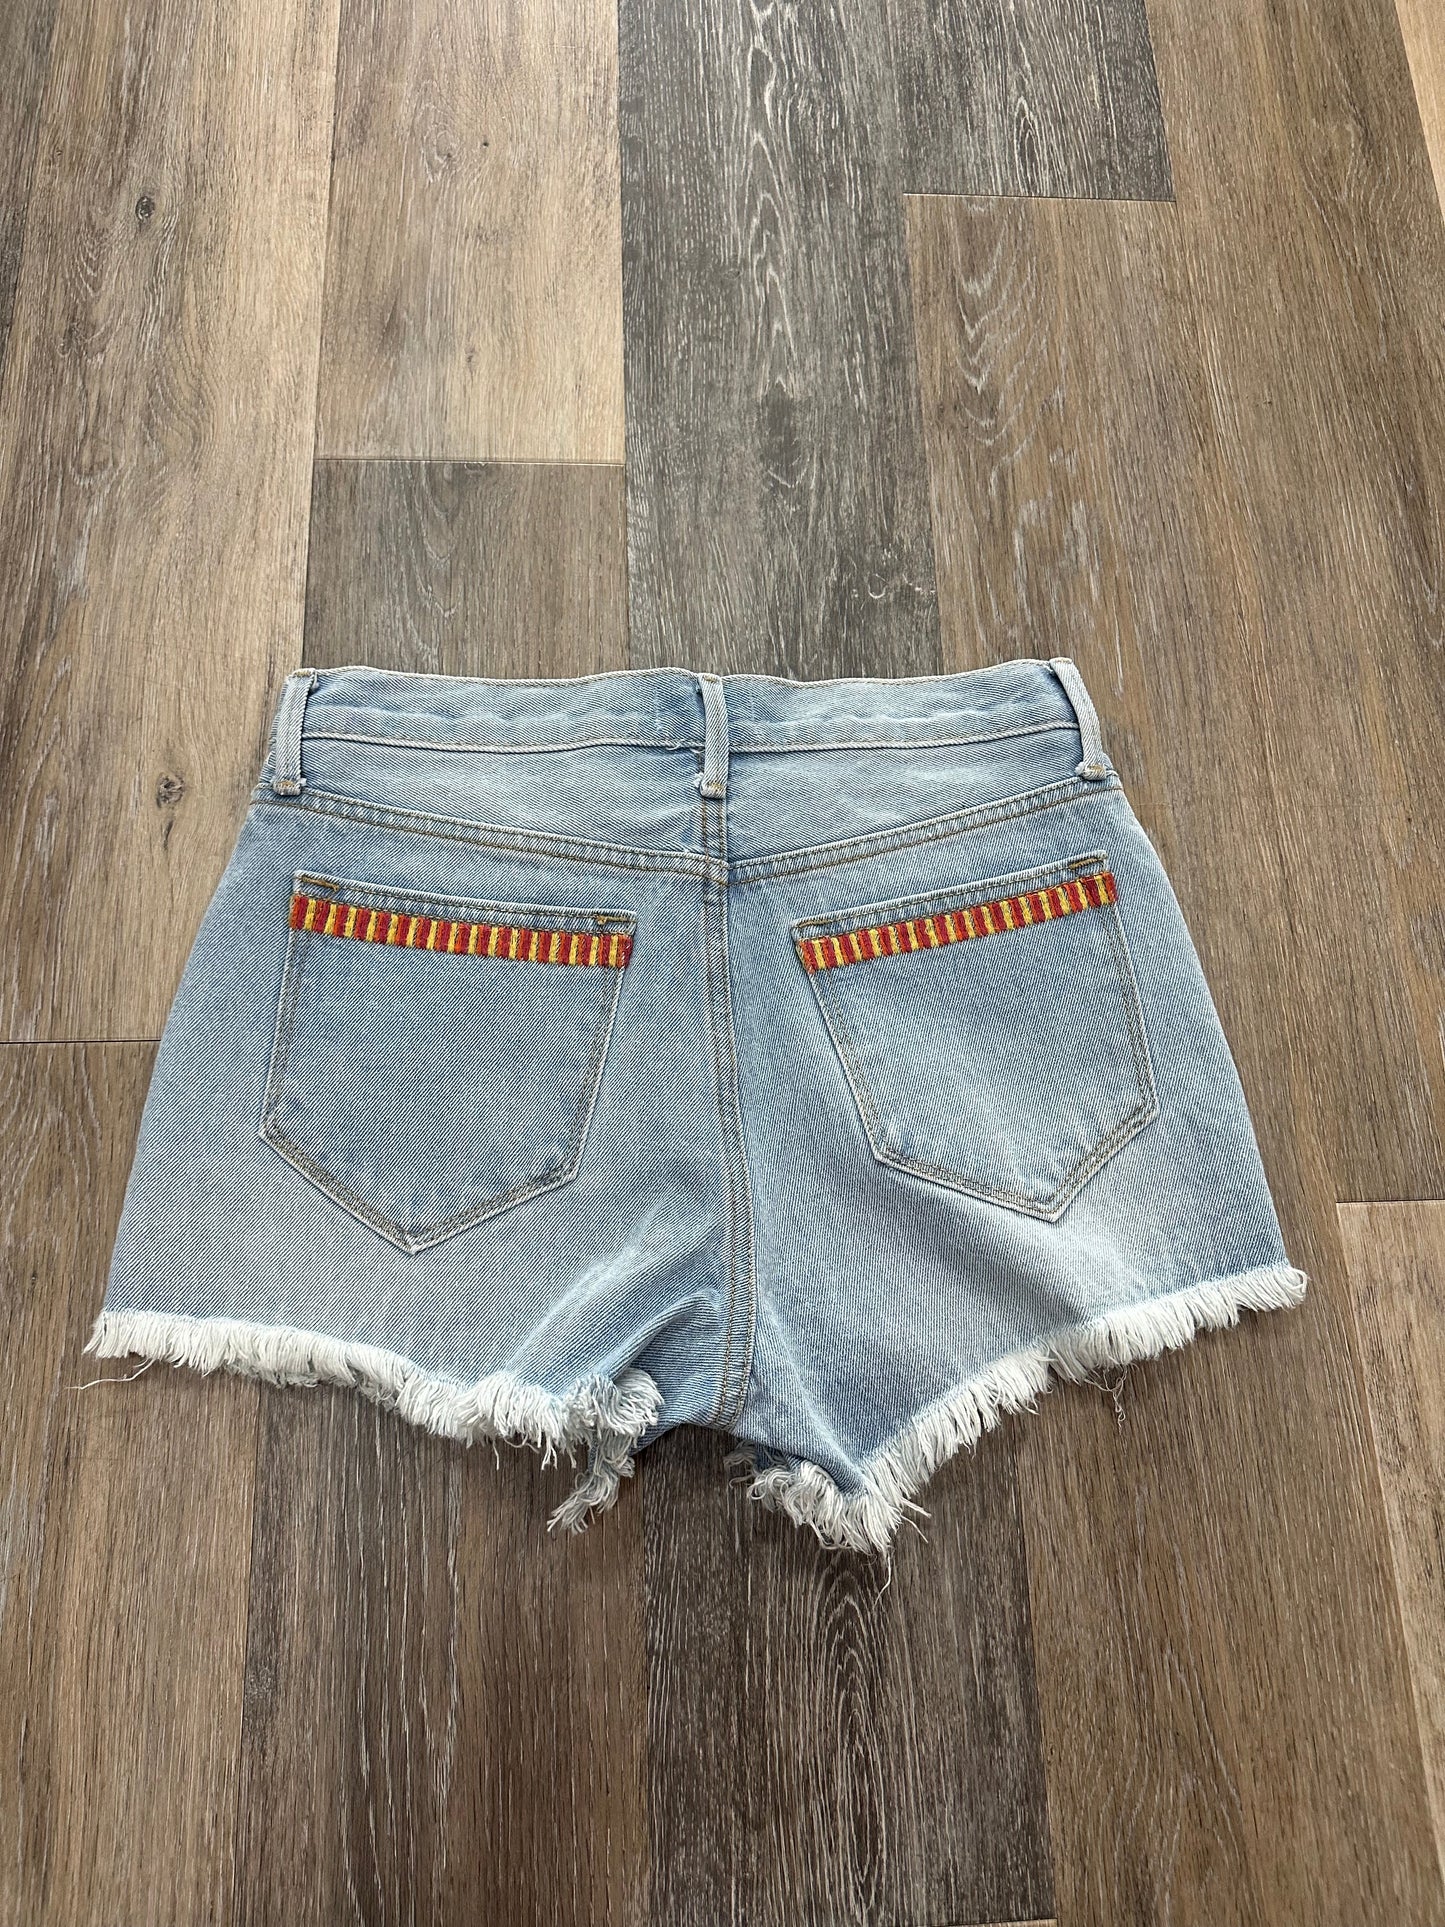 Shorts By Driftwood  Size: 1